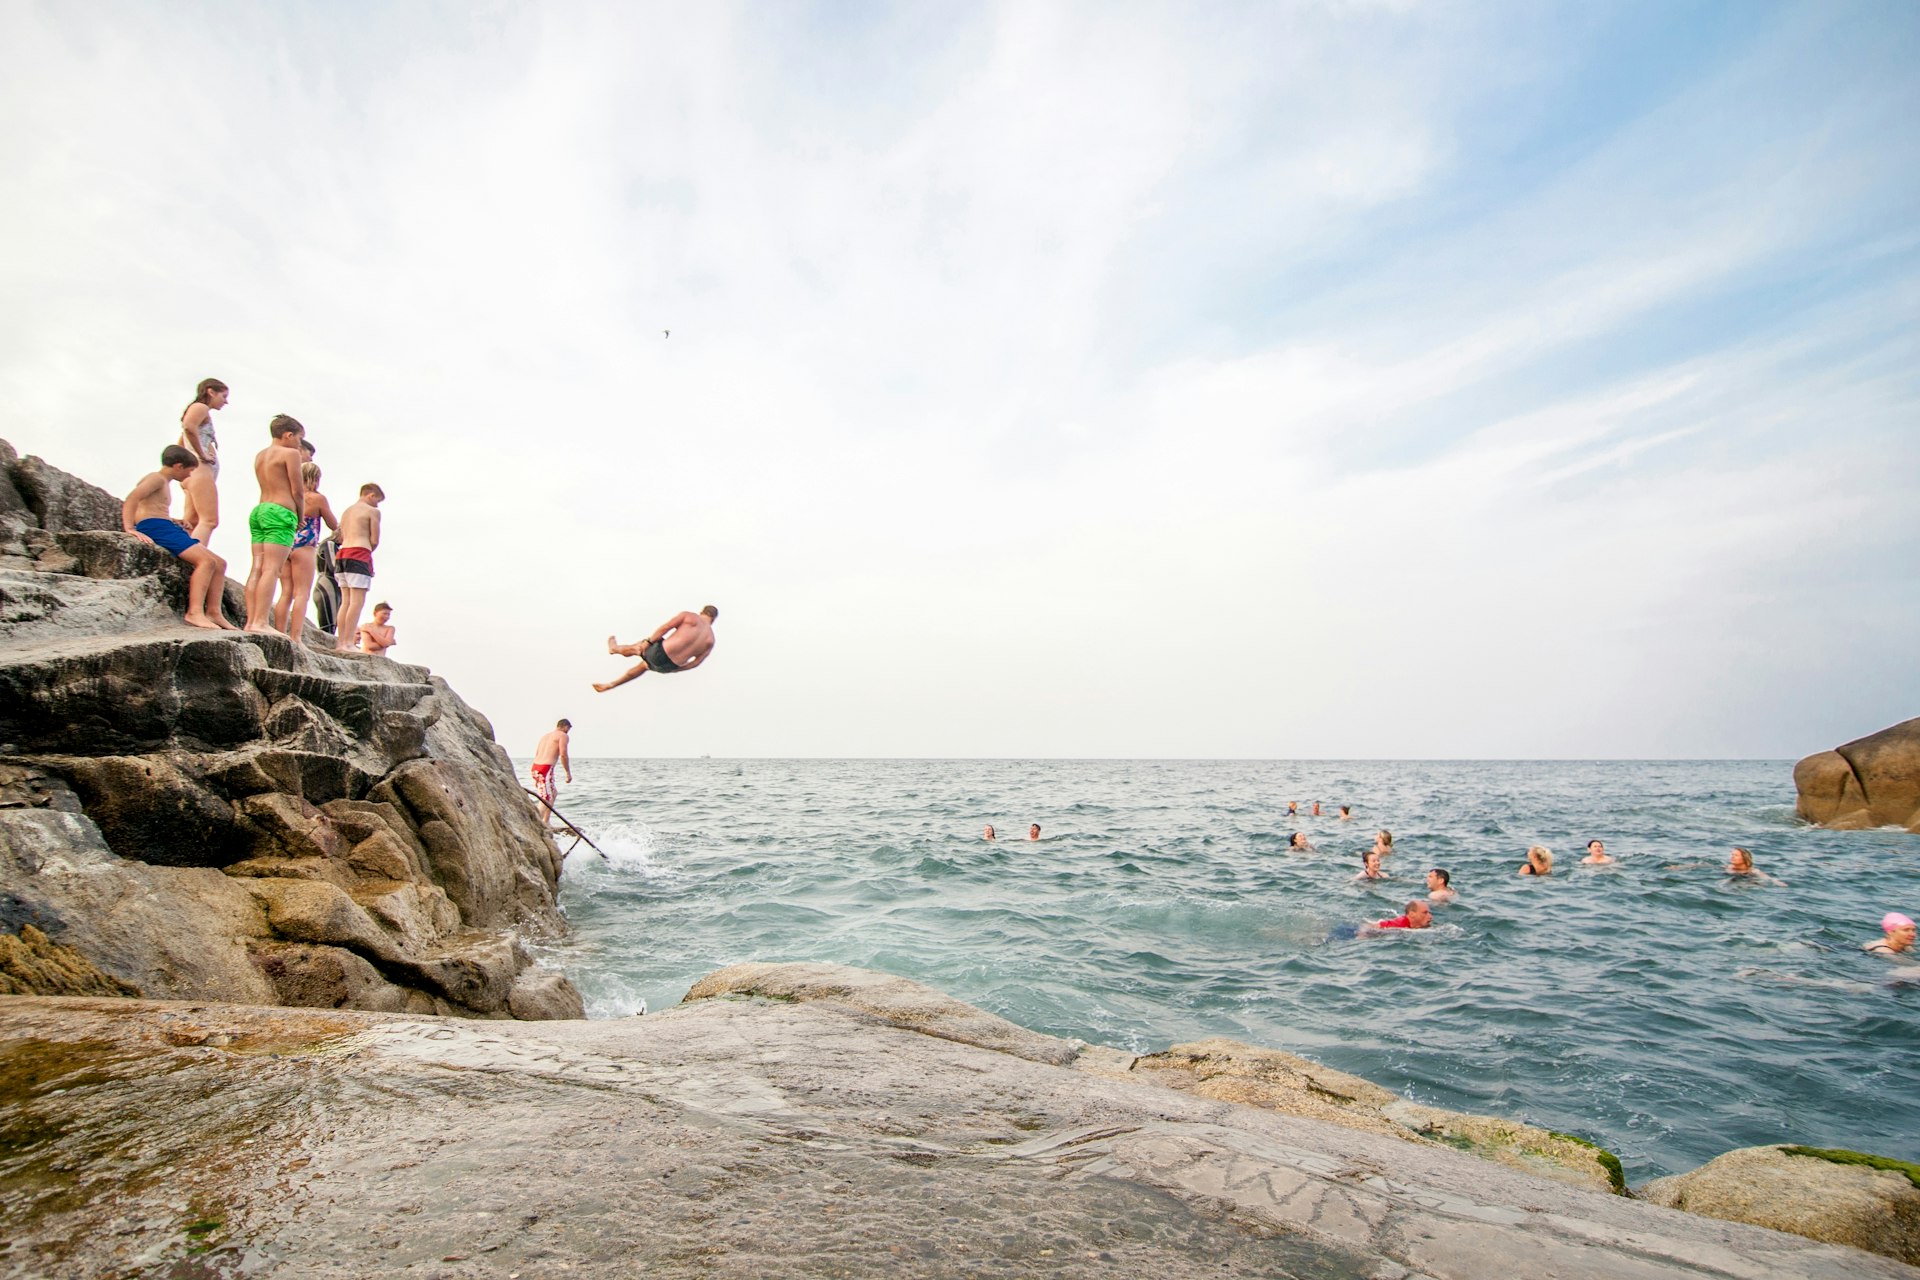 People diving into the sea at the Forty Foot, Dún Laoghaire, County Dublin, Ireland